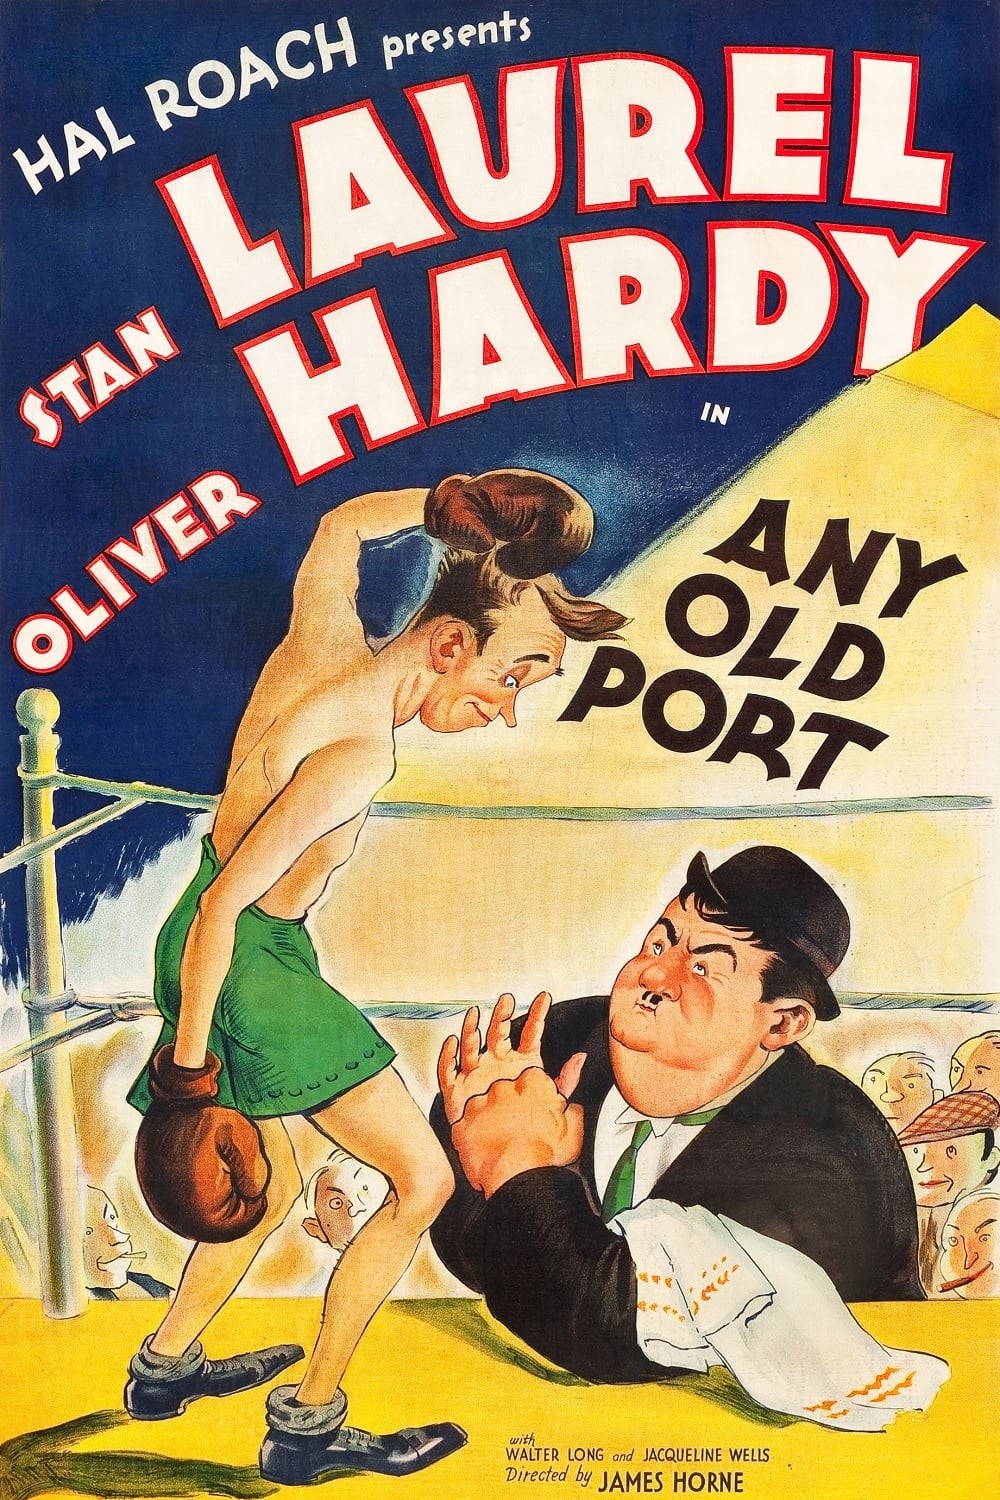 Poster for the movie "Any Old Port!"